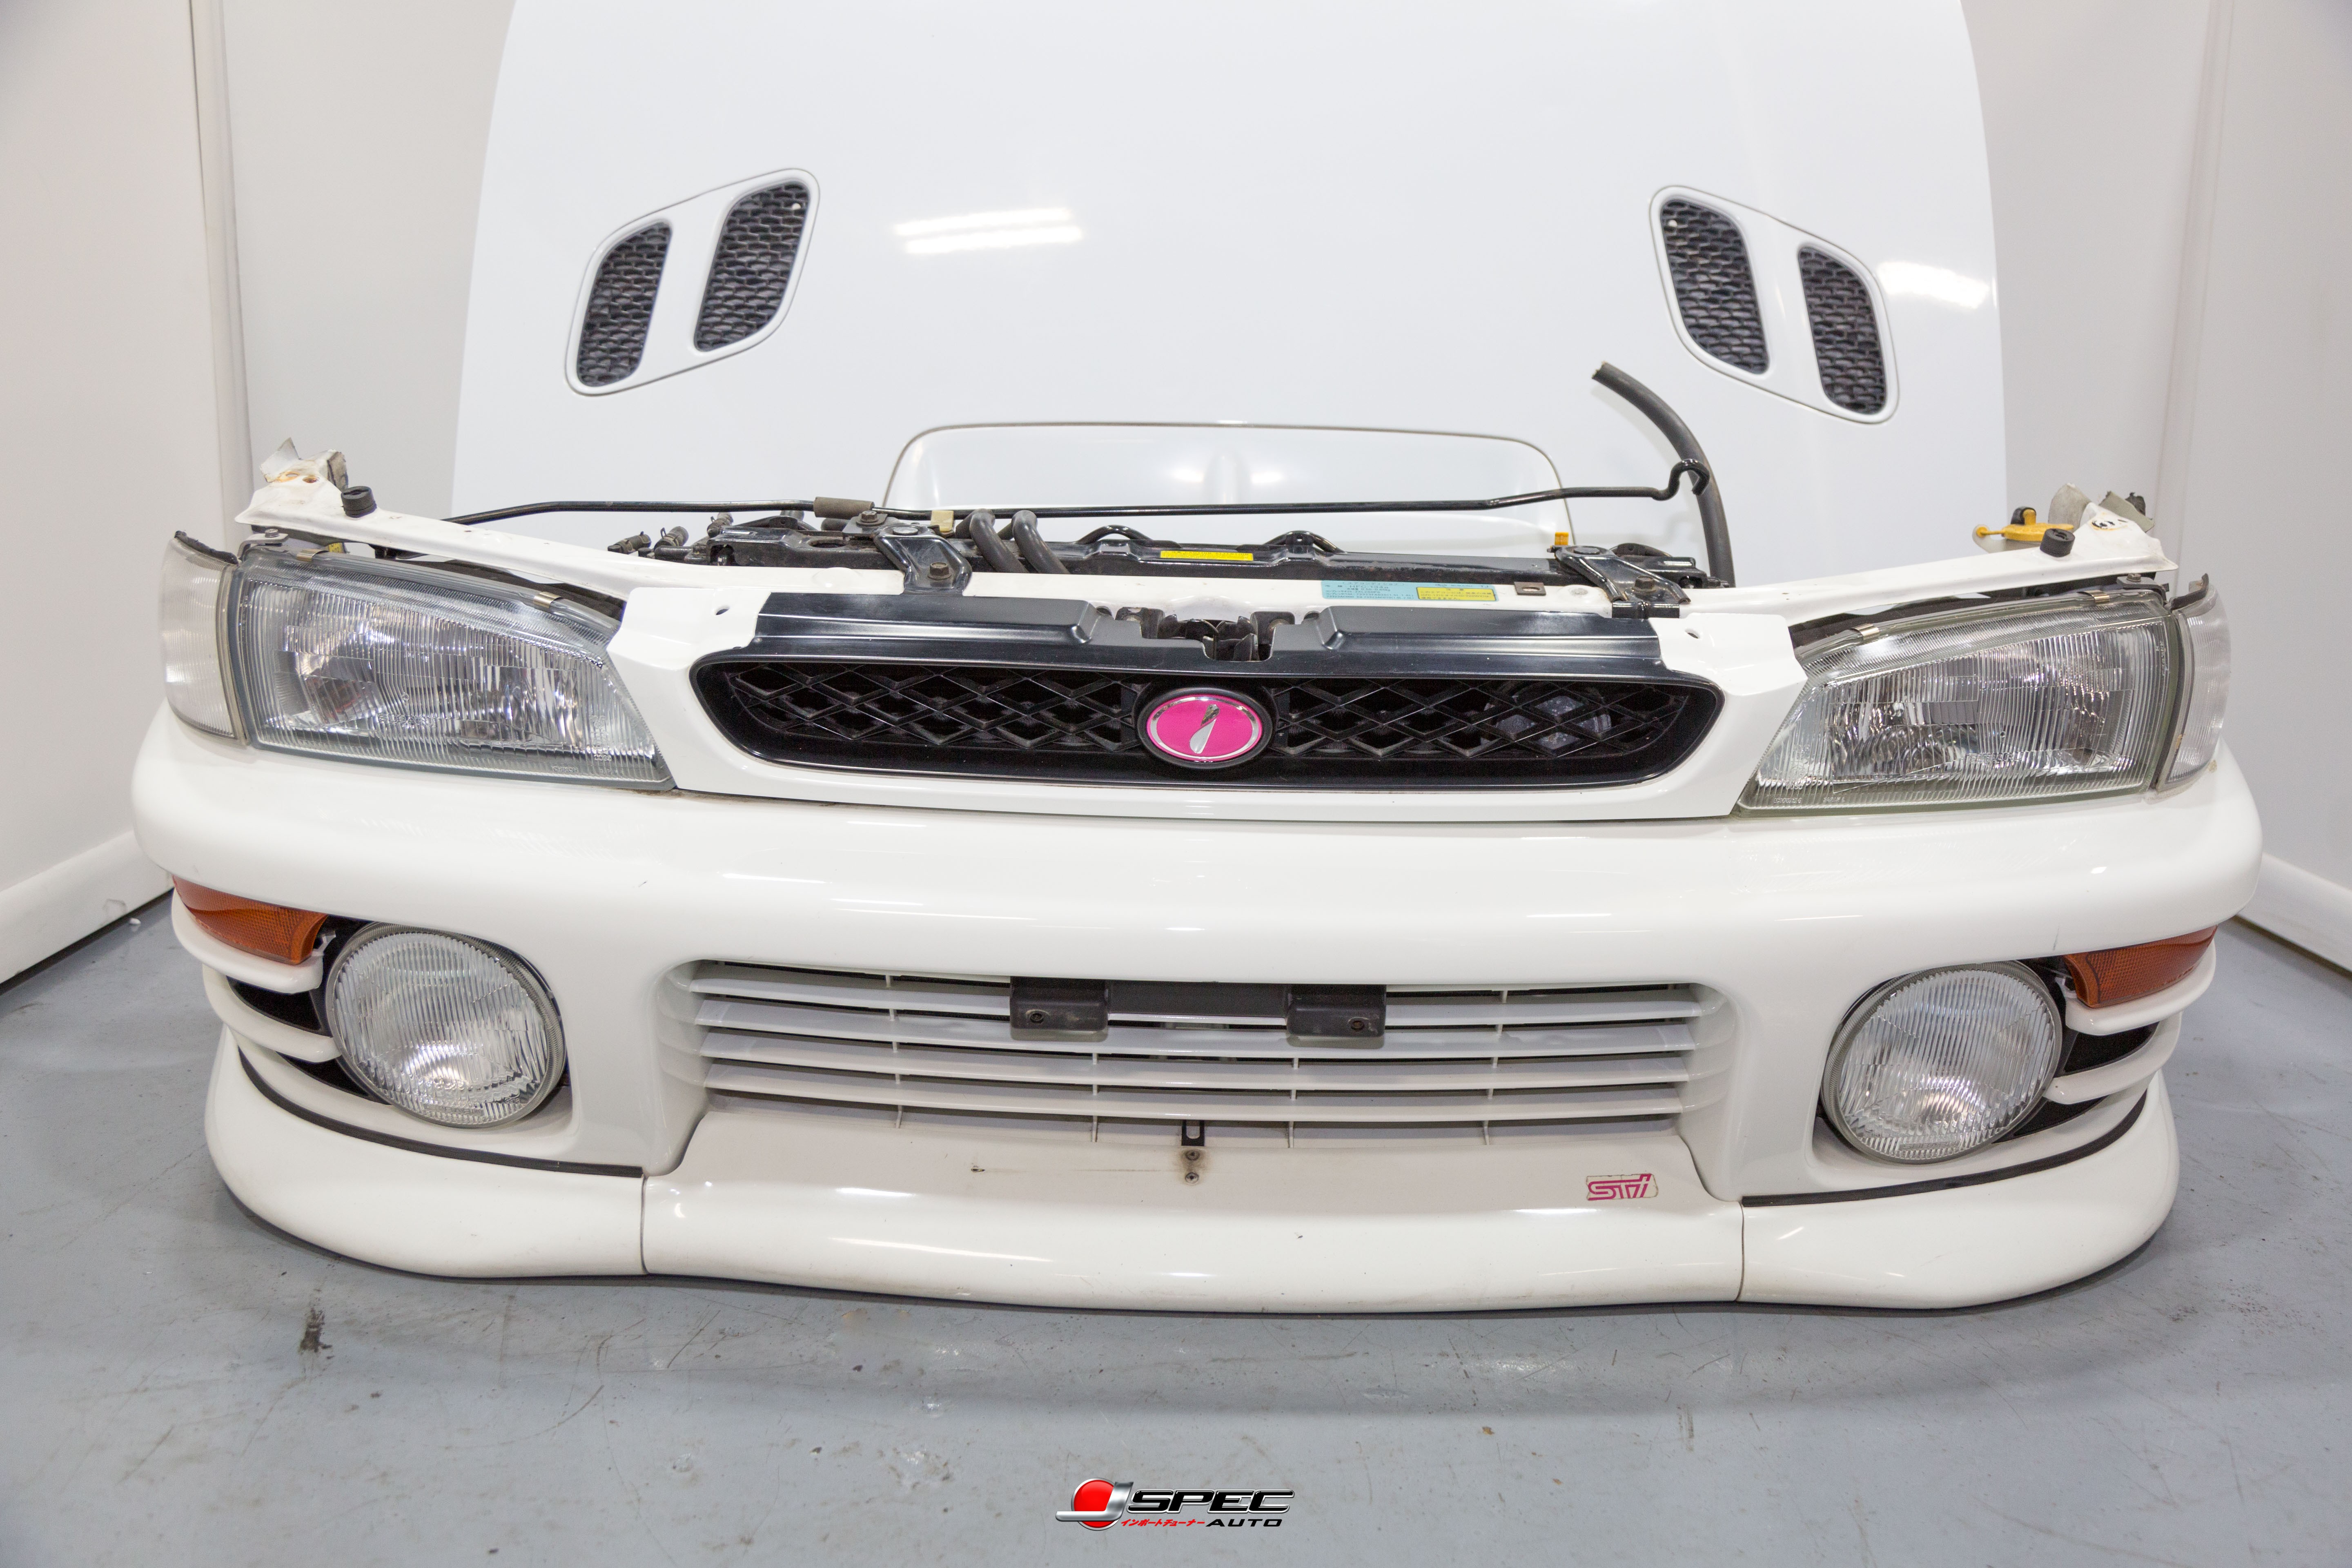 JDM GC8 STi Front End with Aluminum Hood Fog Lights and Lip